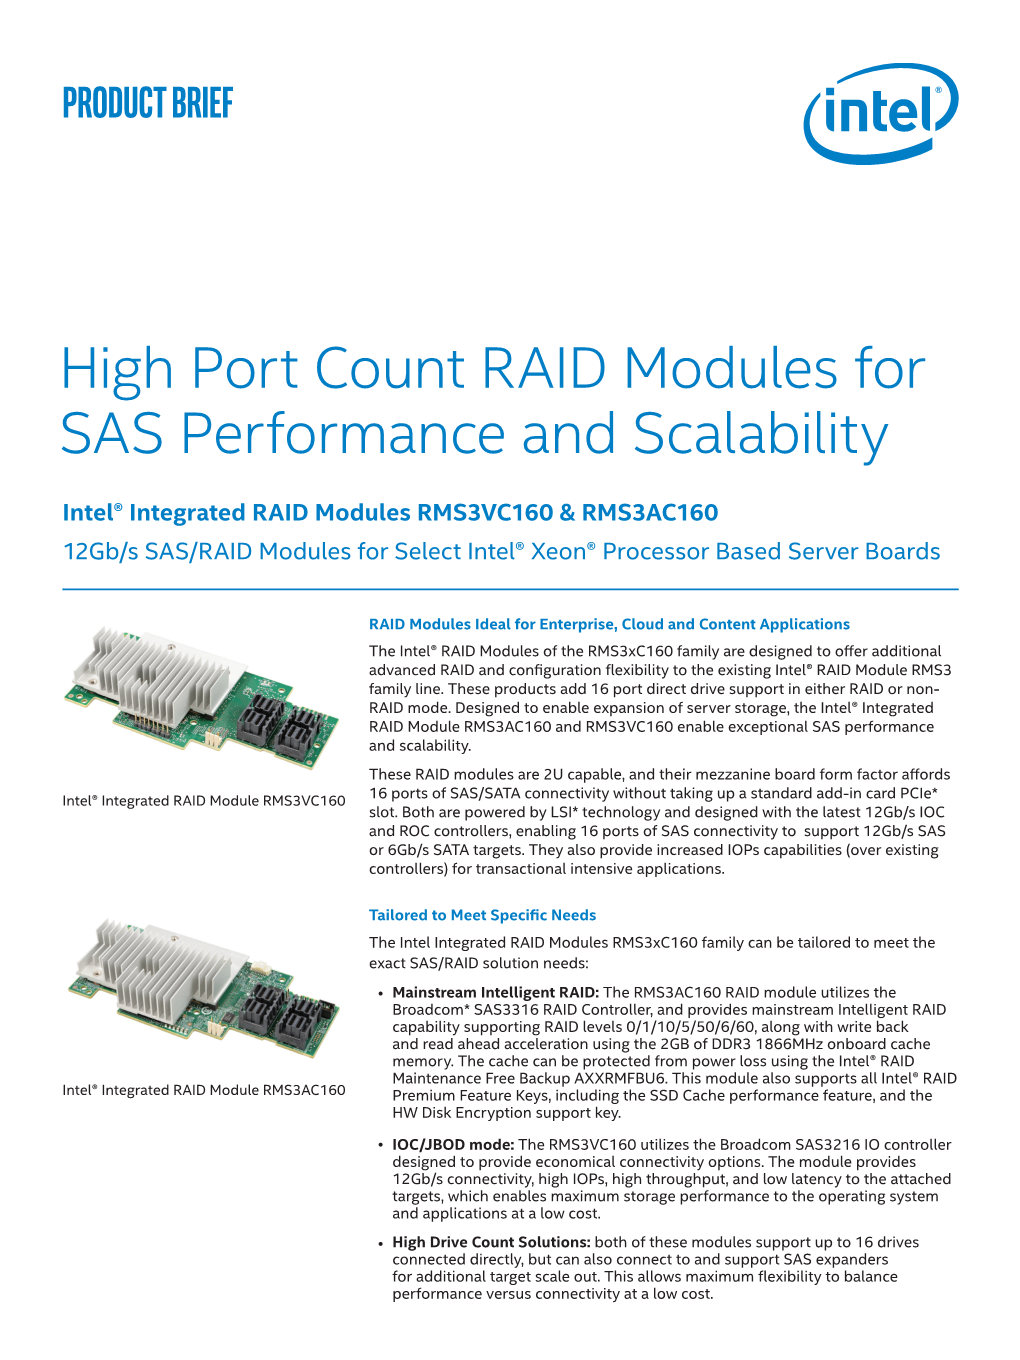 High Port Count RAID Modules for SAS Performance and Scalability